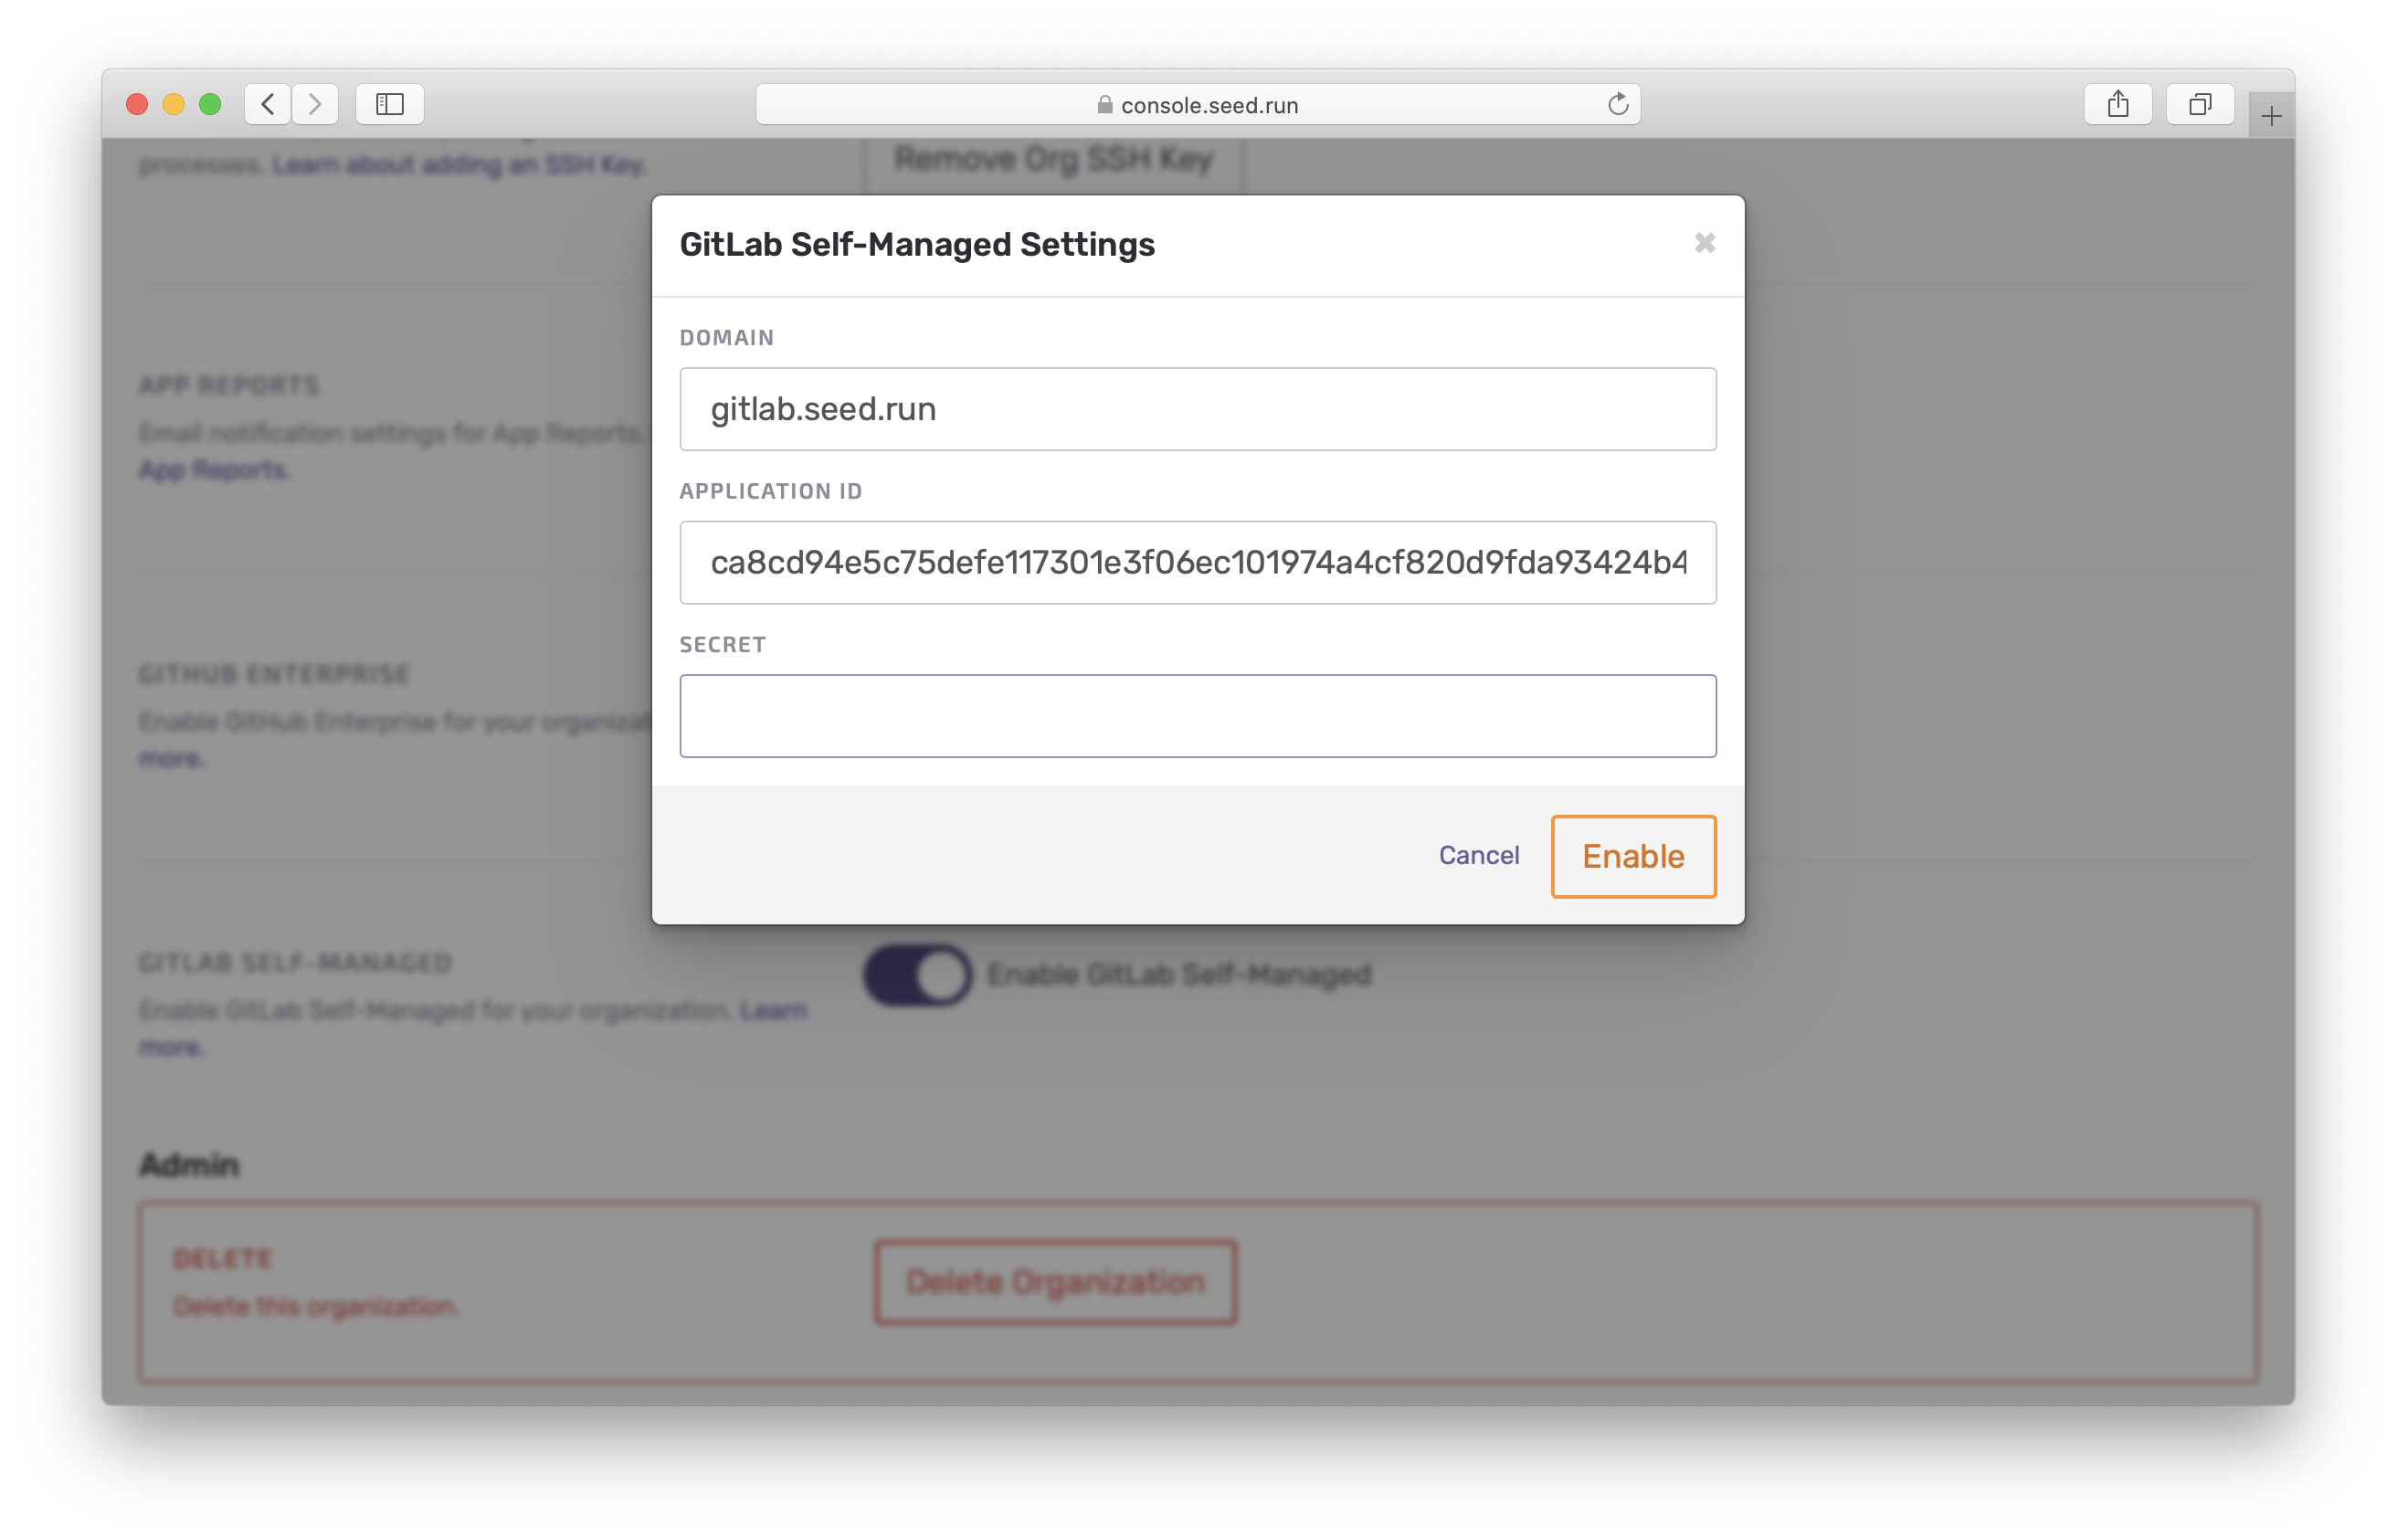 Enabled GitLab Self-Managed on Seed